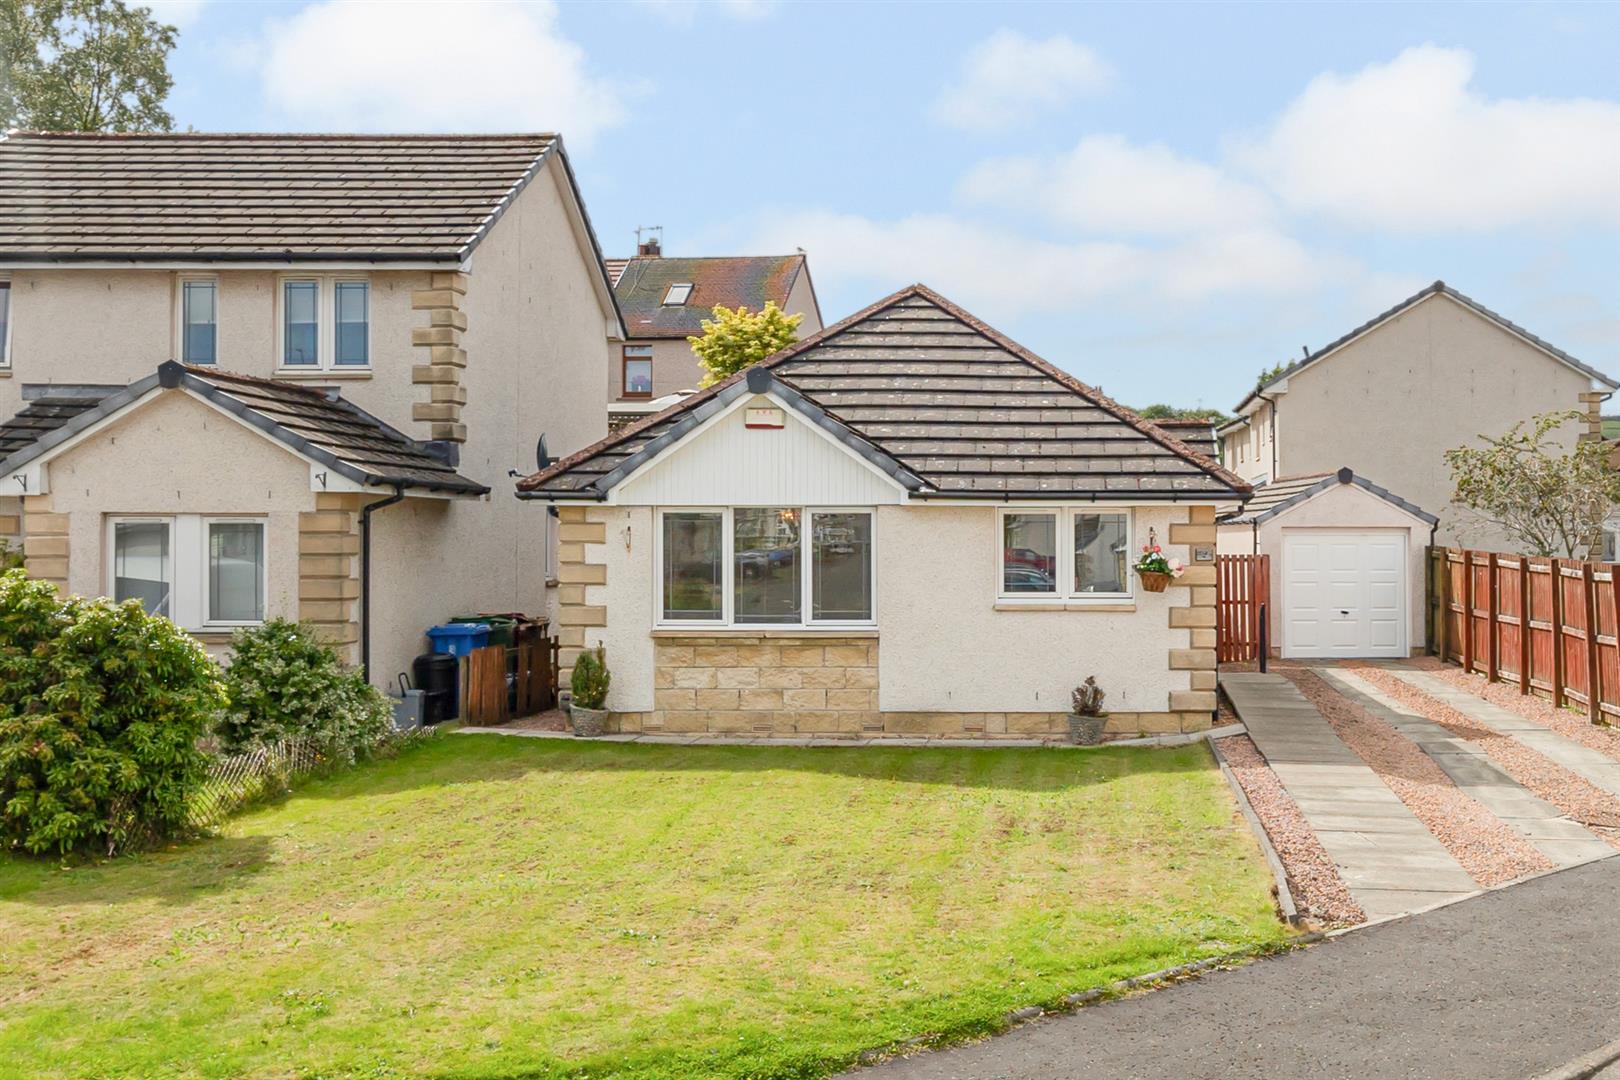 3 bed bungalow for sale in Connolly Drive, Denny, FK6 